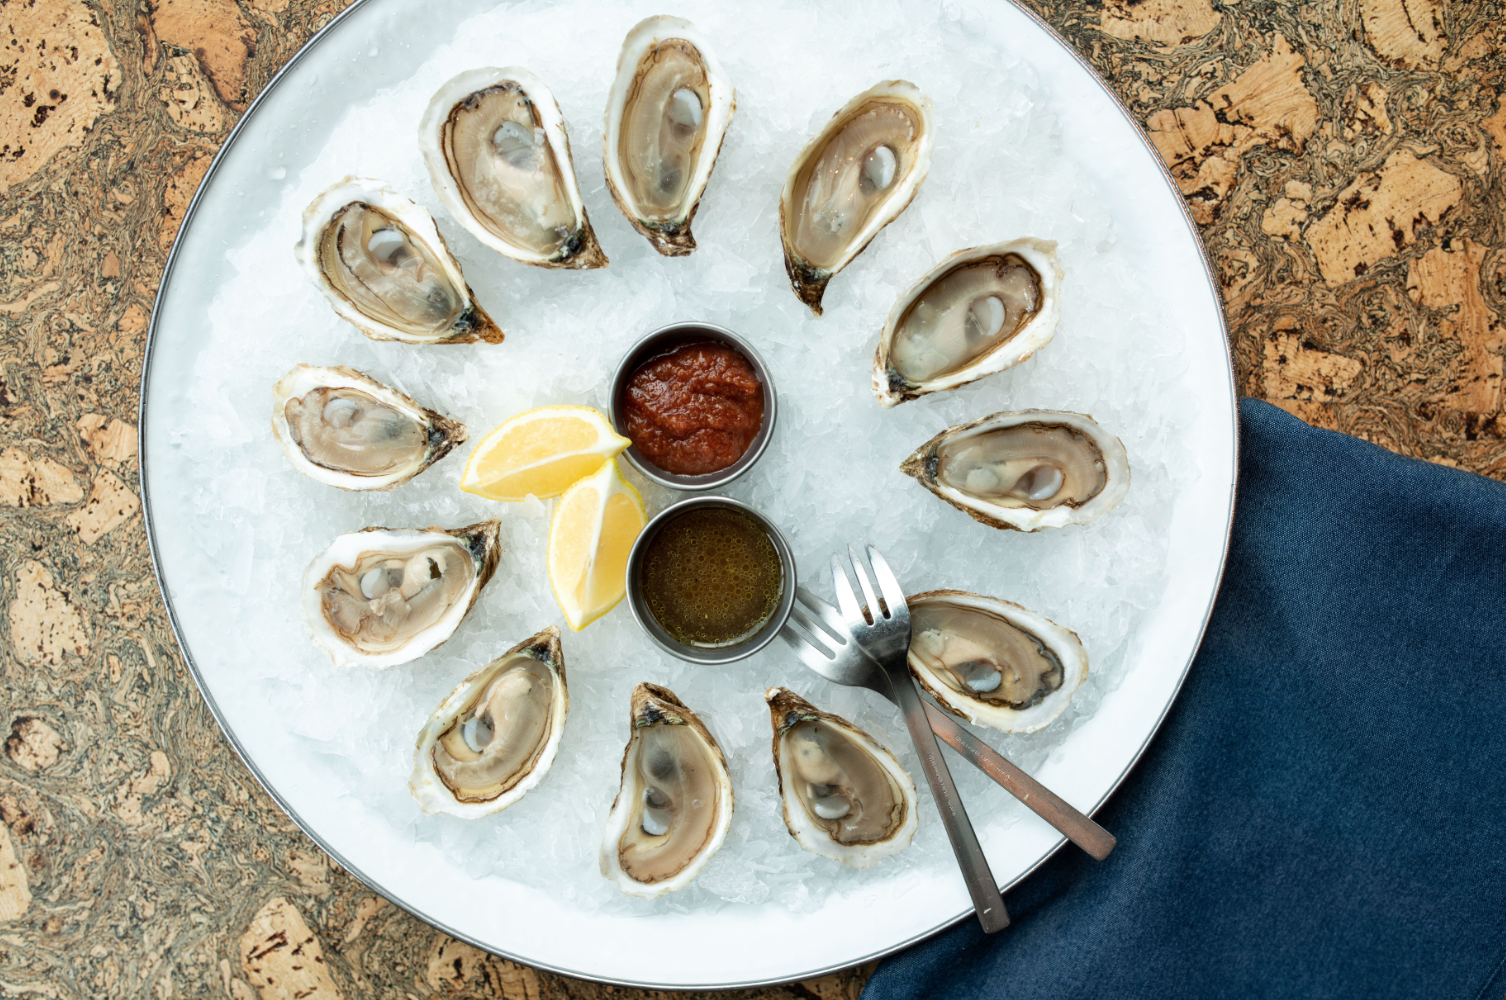 Sip, Swirl and Shuck at Bully Boy’s Oysters & Bubbles